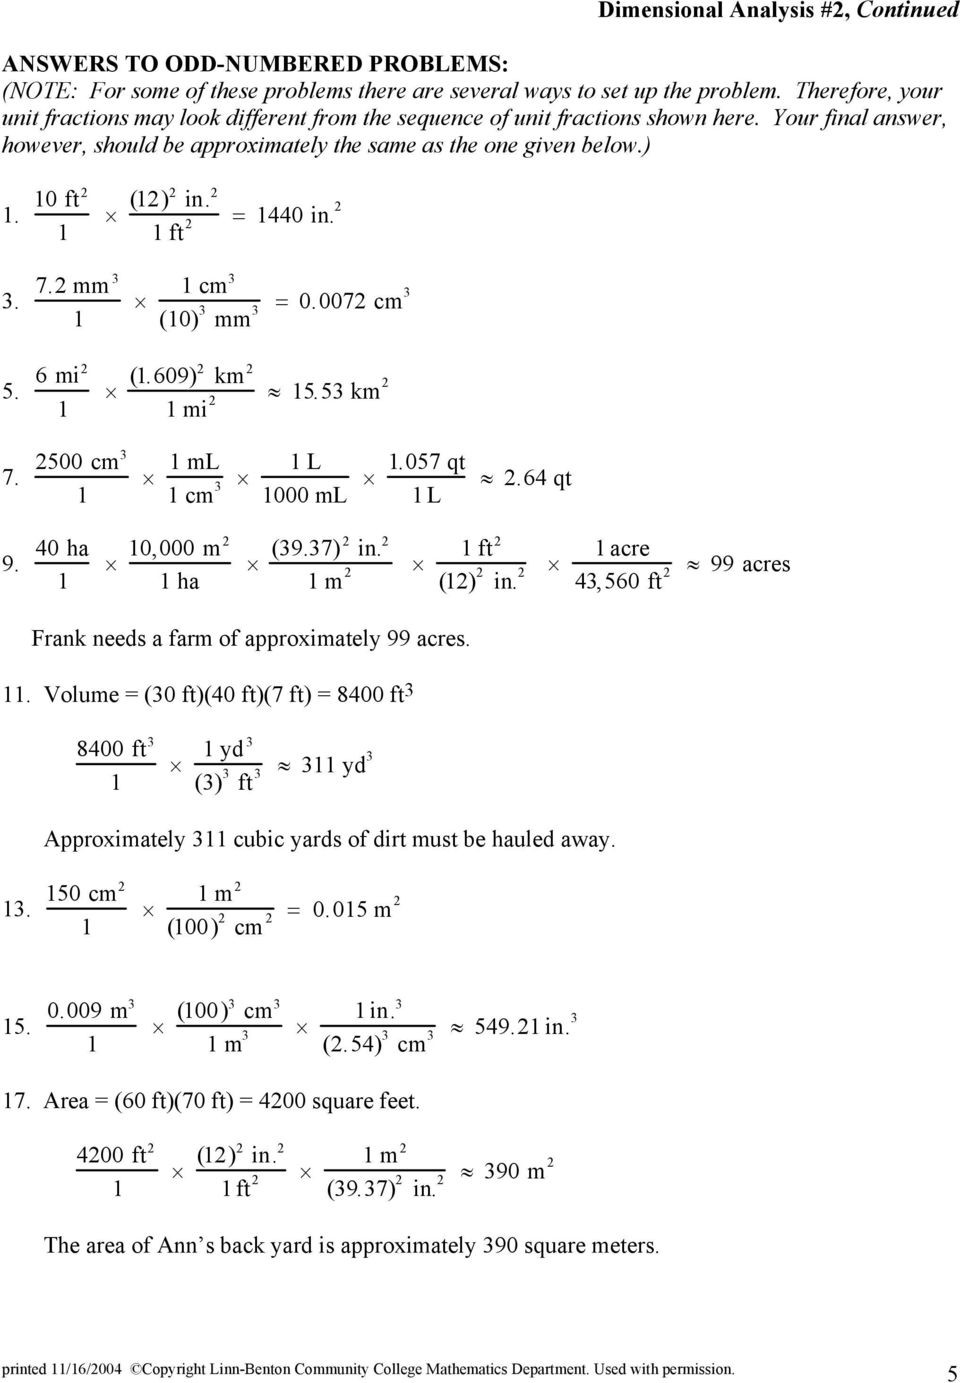 Dimensional Analysis Worksheet Answers Chemistry Dimensional Analysis 2 Pdf Free Download